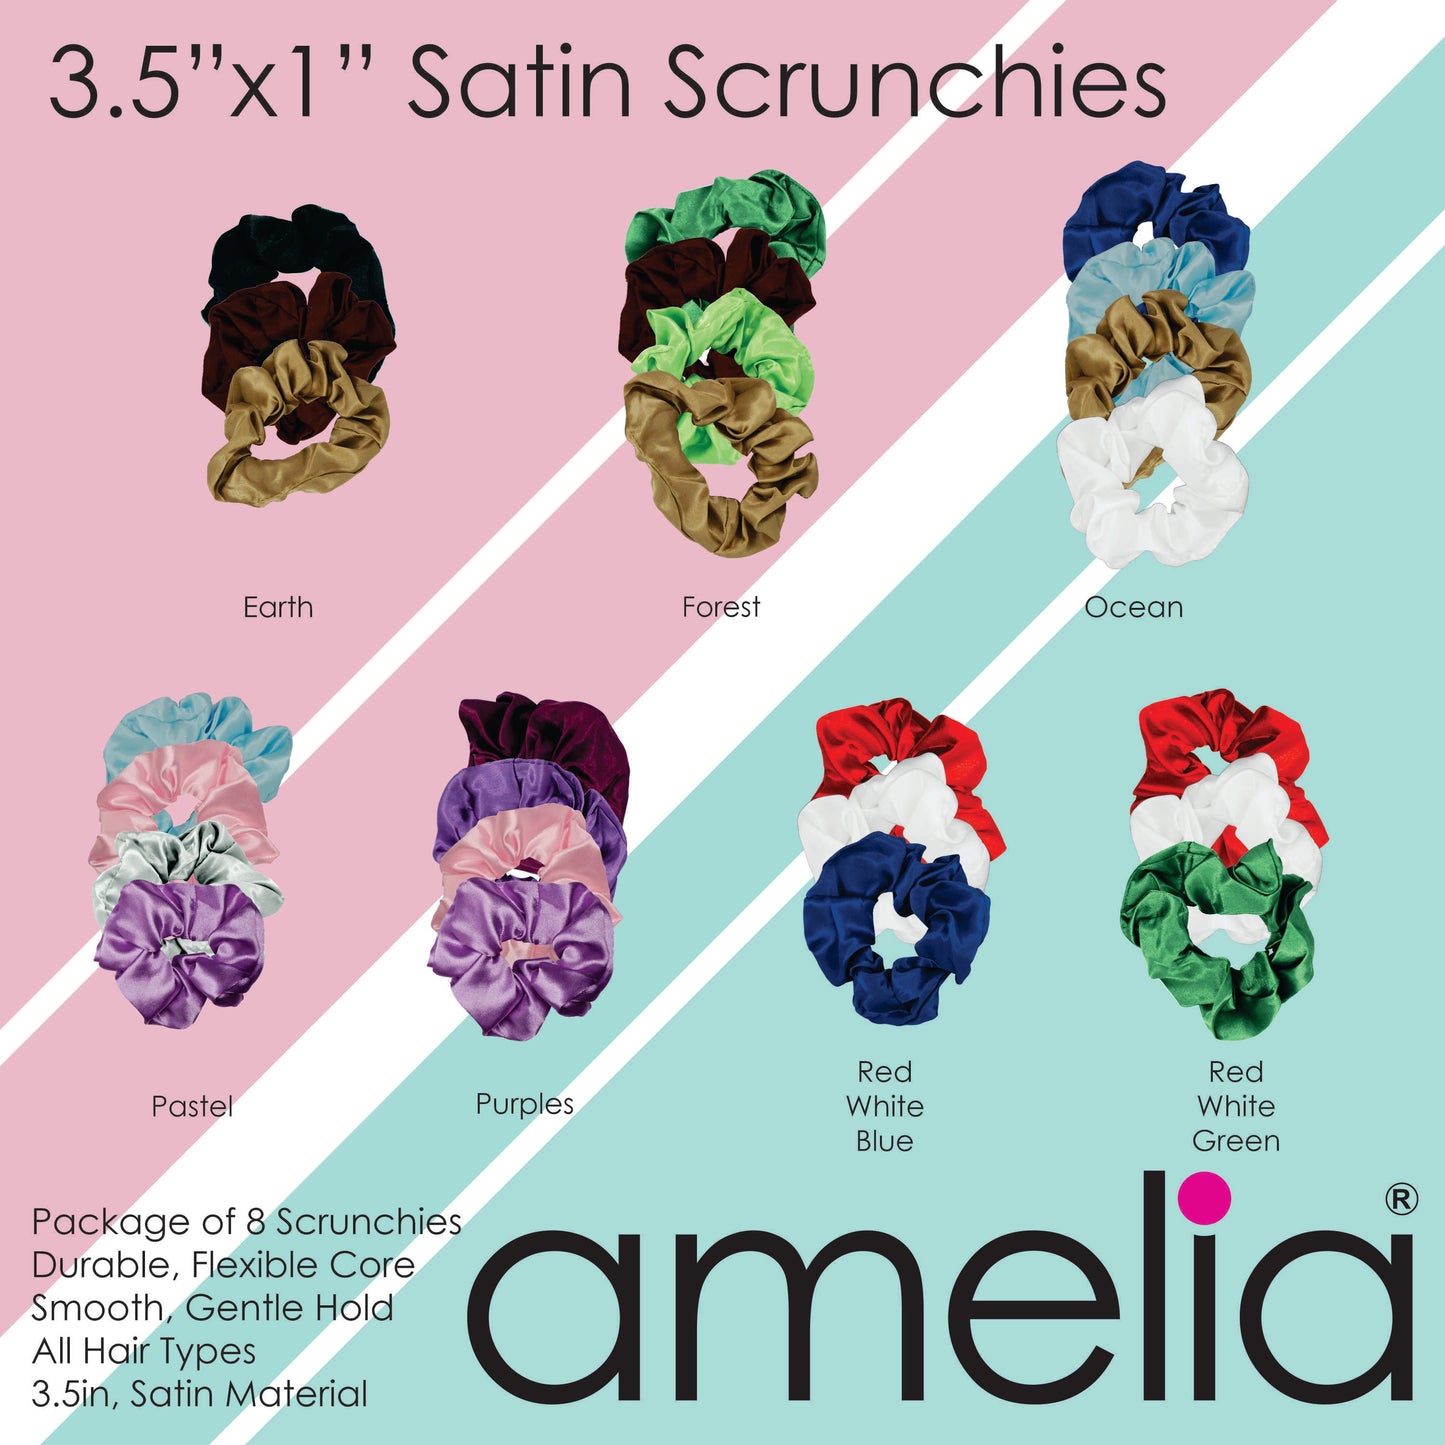 Amelia Beauty Products, Burgundy Satin Scrunchies, 3.5in Diameter, Gentle on Hair, Strong Hold, No Snag, No Dents or Creases. 8 Pack